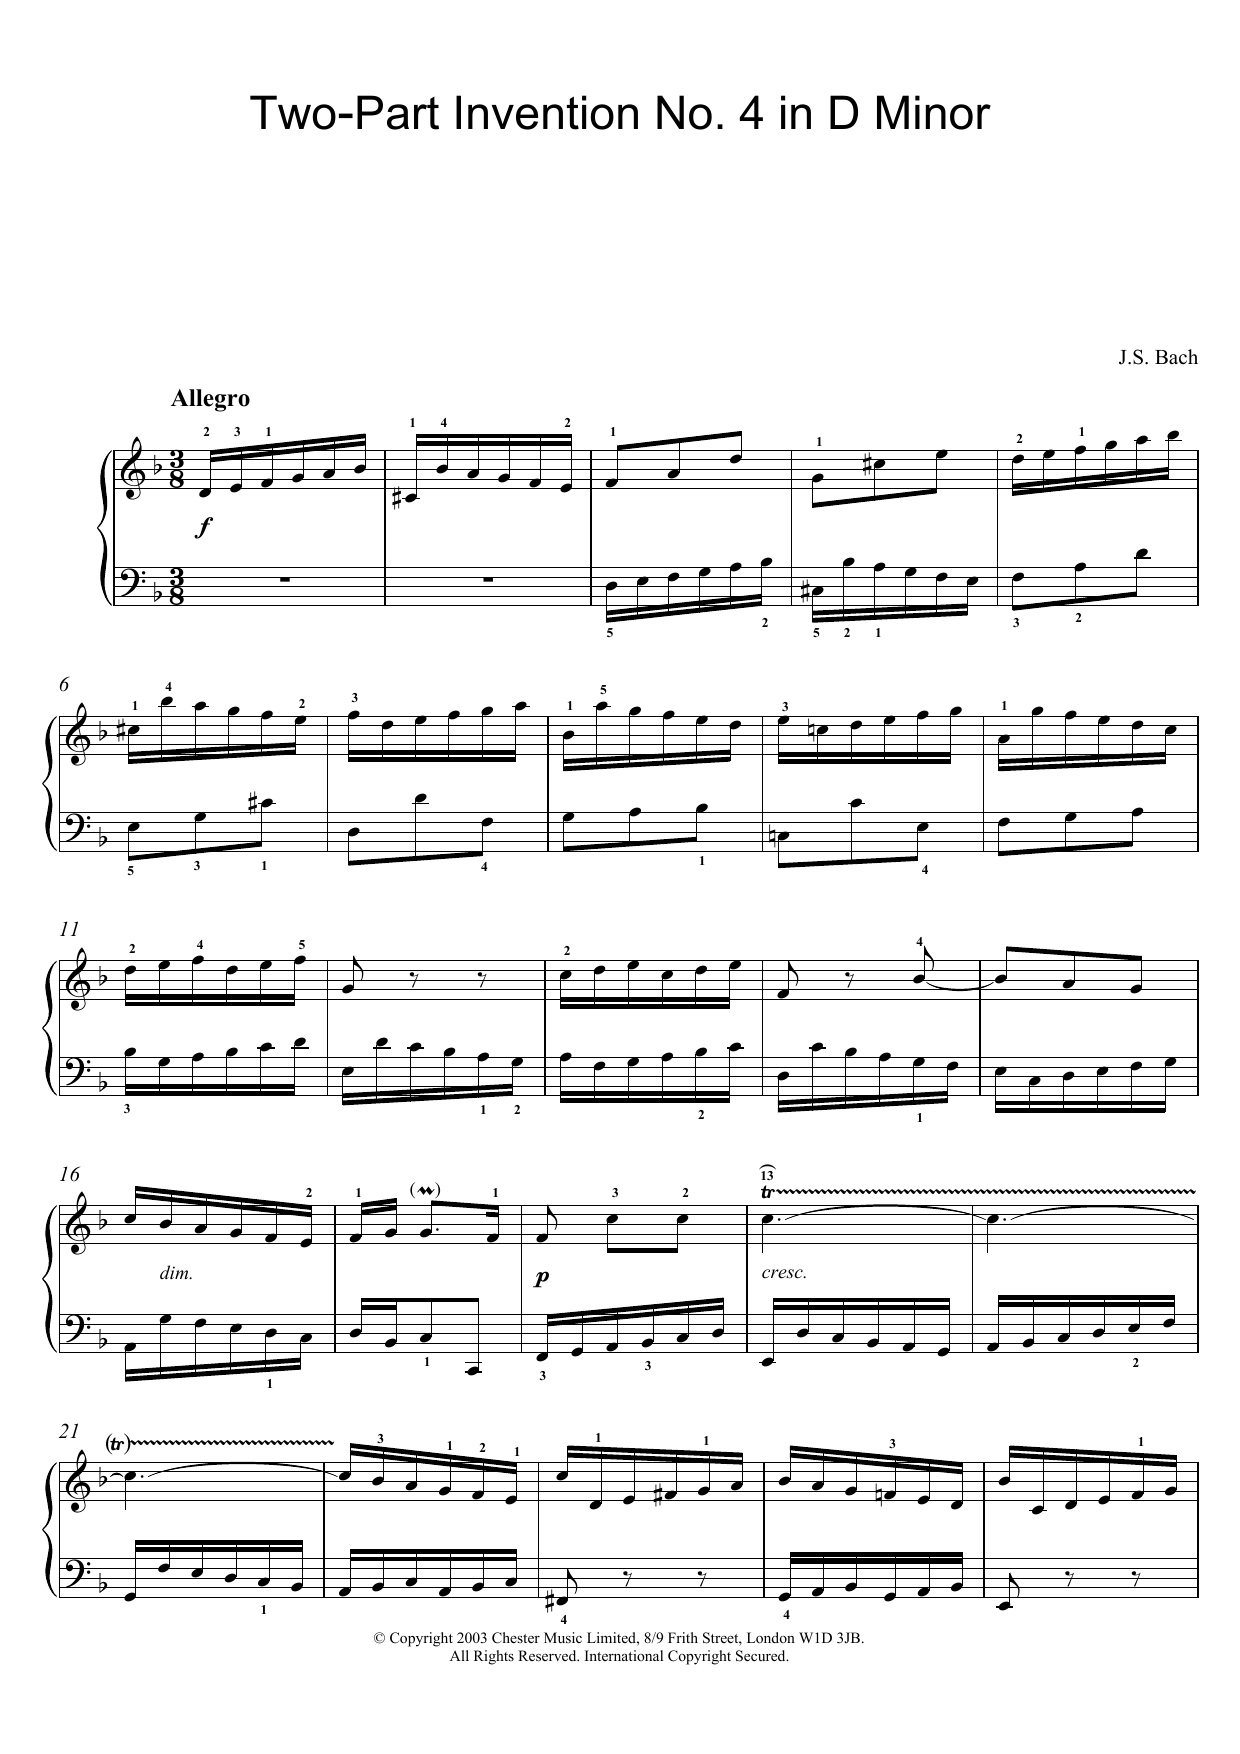 Download Johann Sebastian Bach Two-Part Invention No. 4 in D Minor Sheet Music